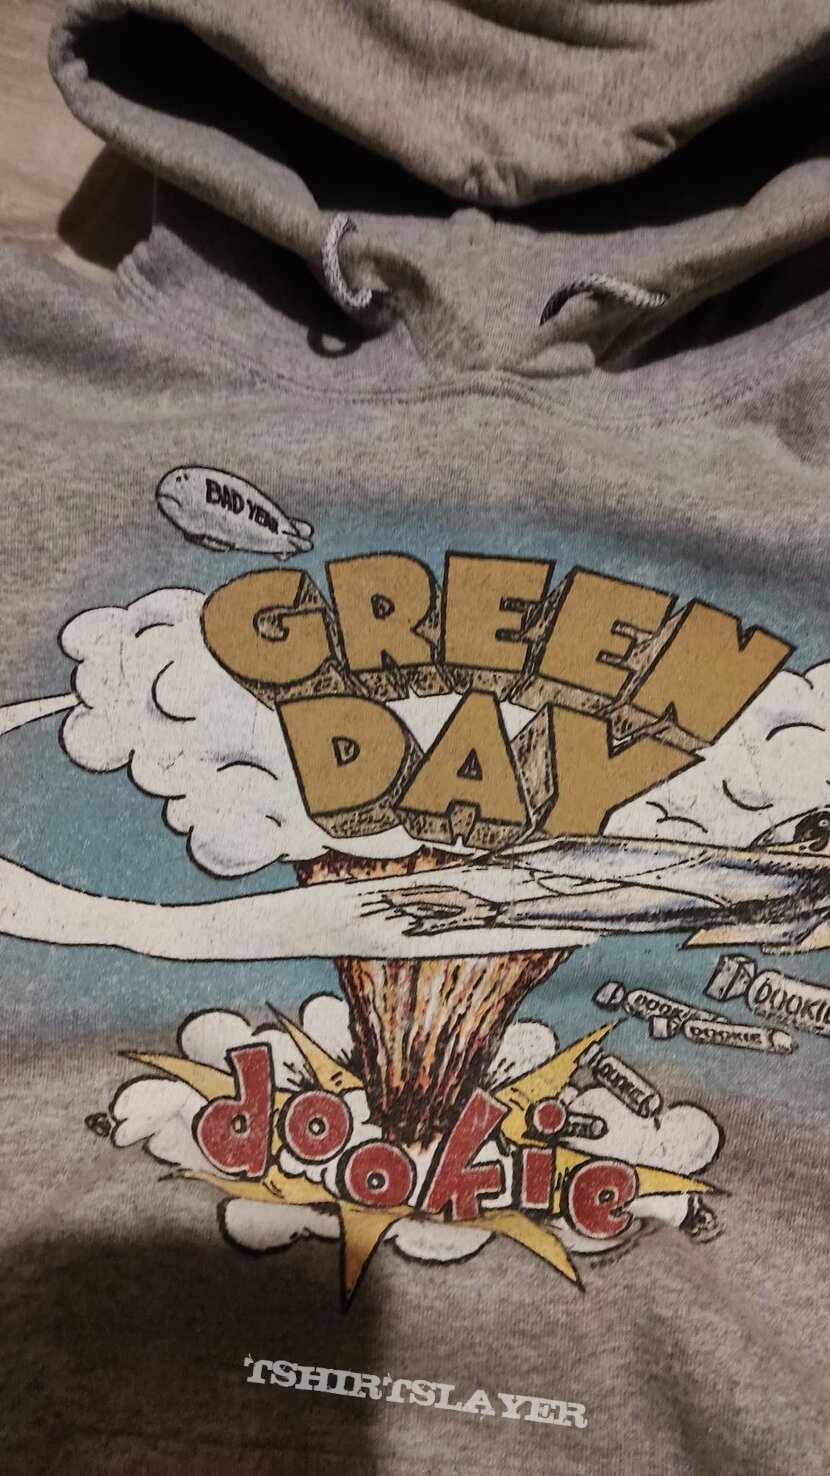 Green Day Hoodie